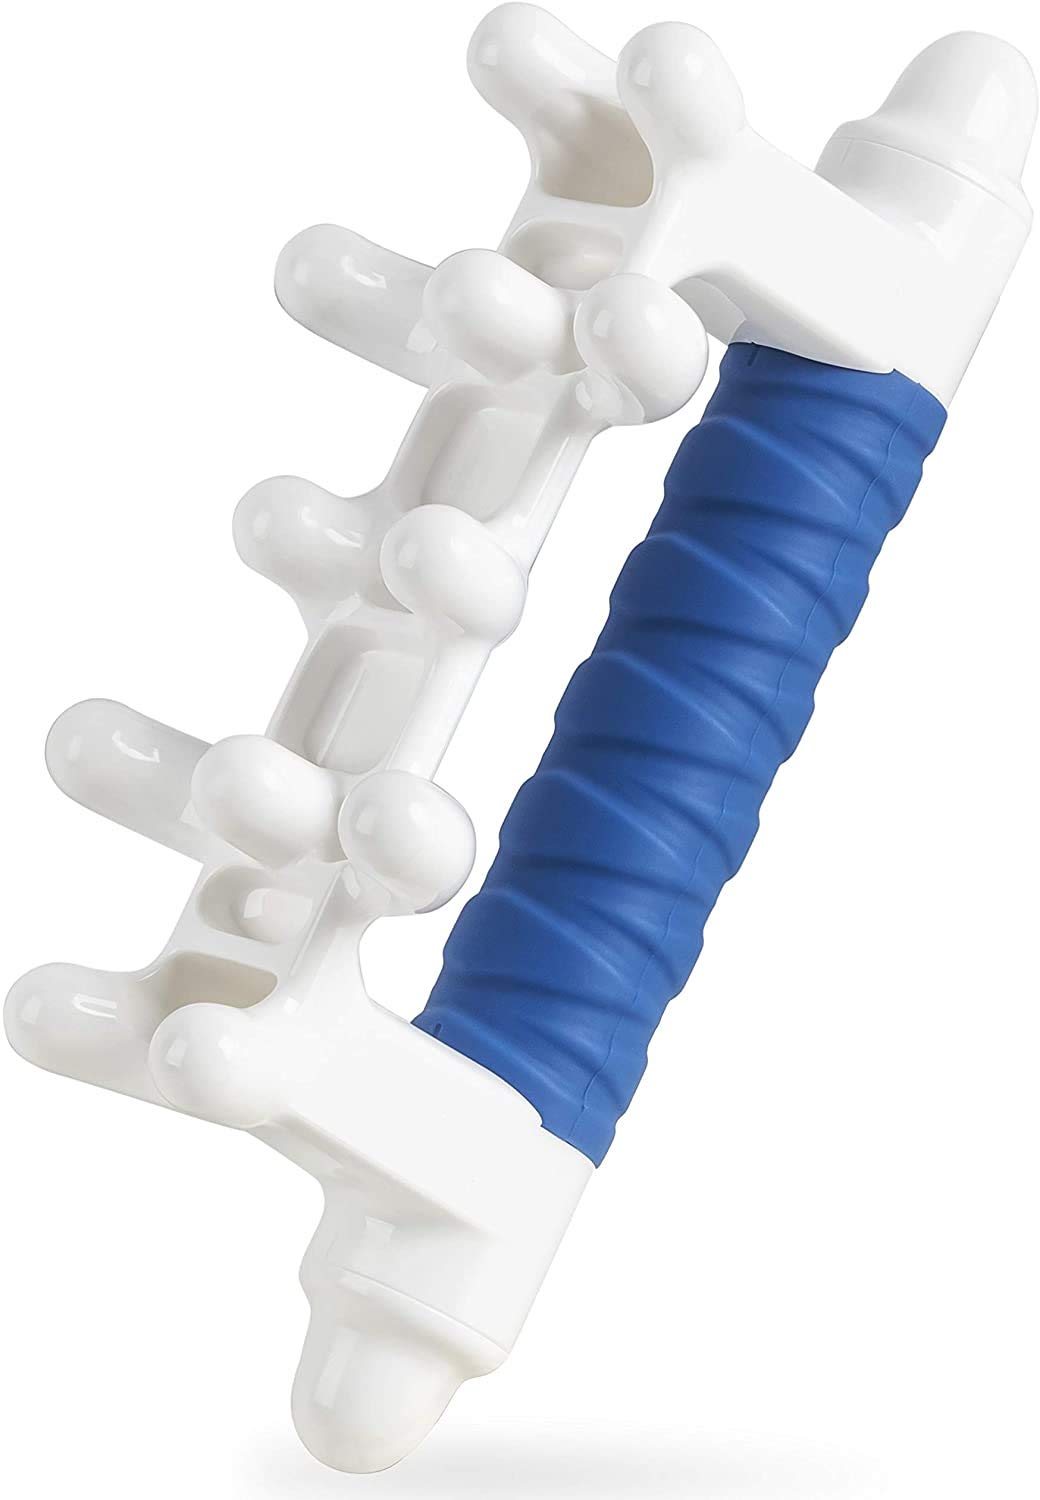 Trigger Point Massager Tool – BodyMed® - Health & Wellness Products